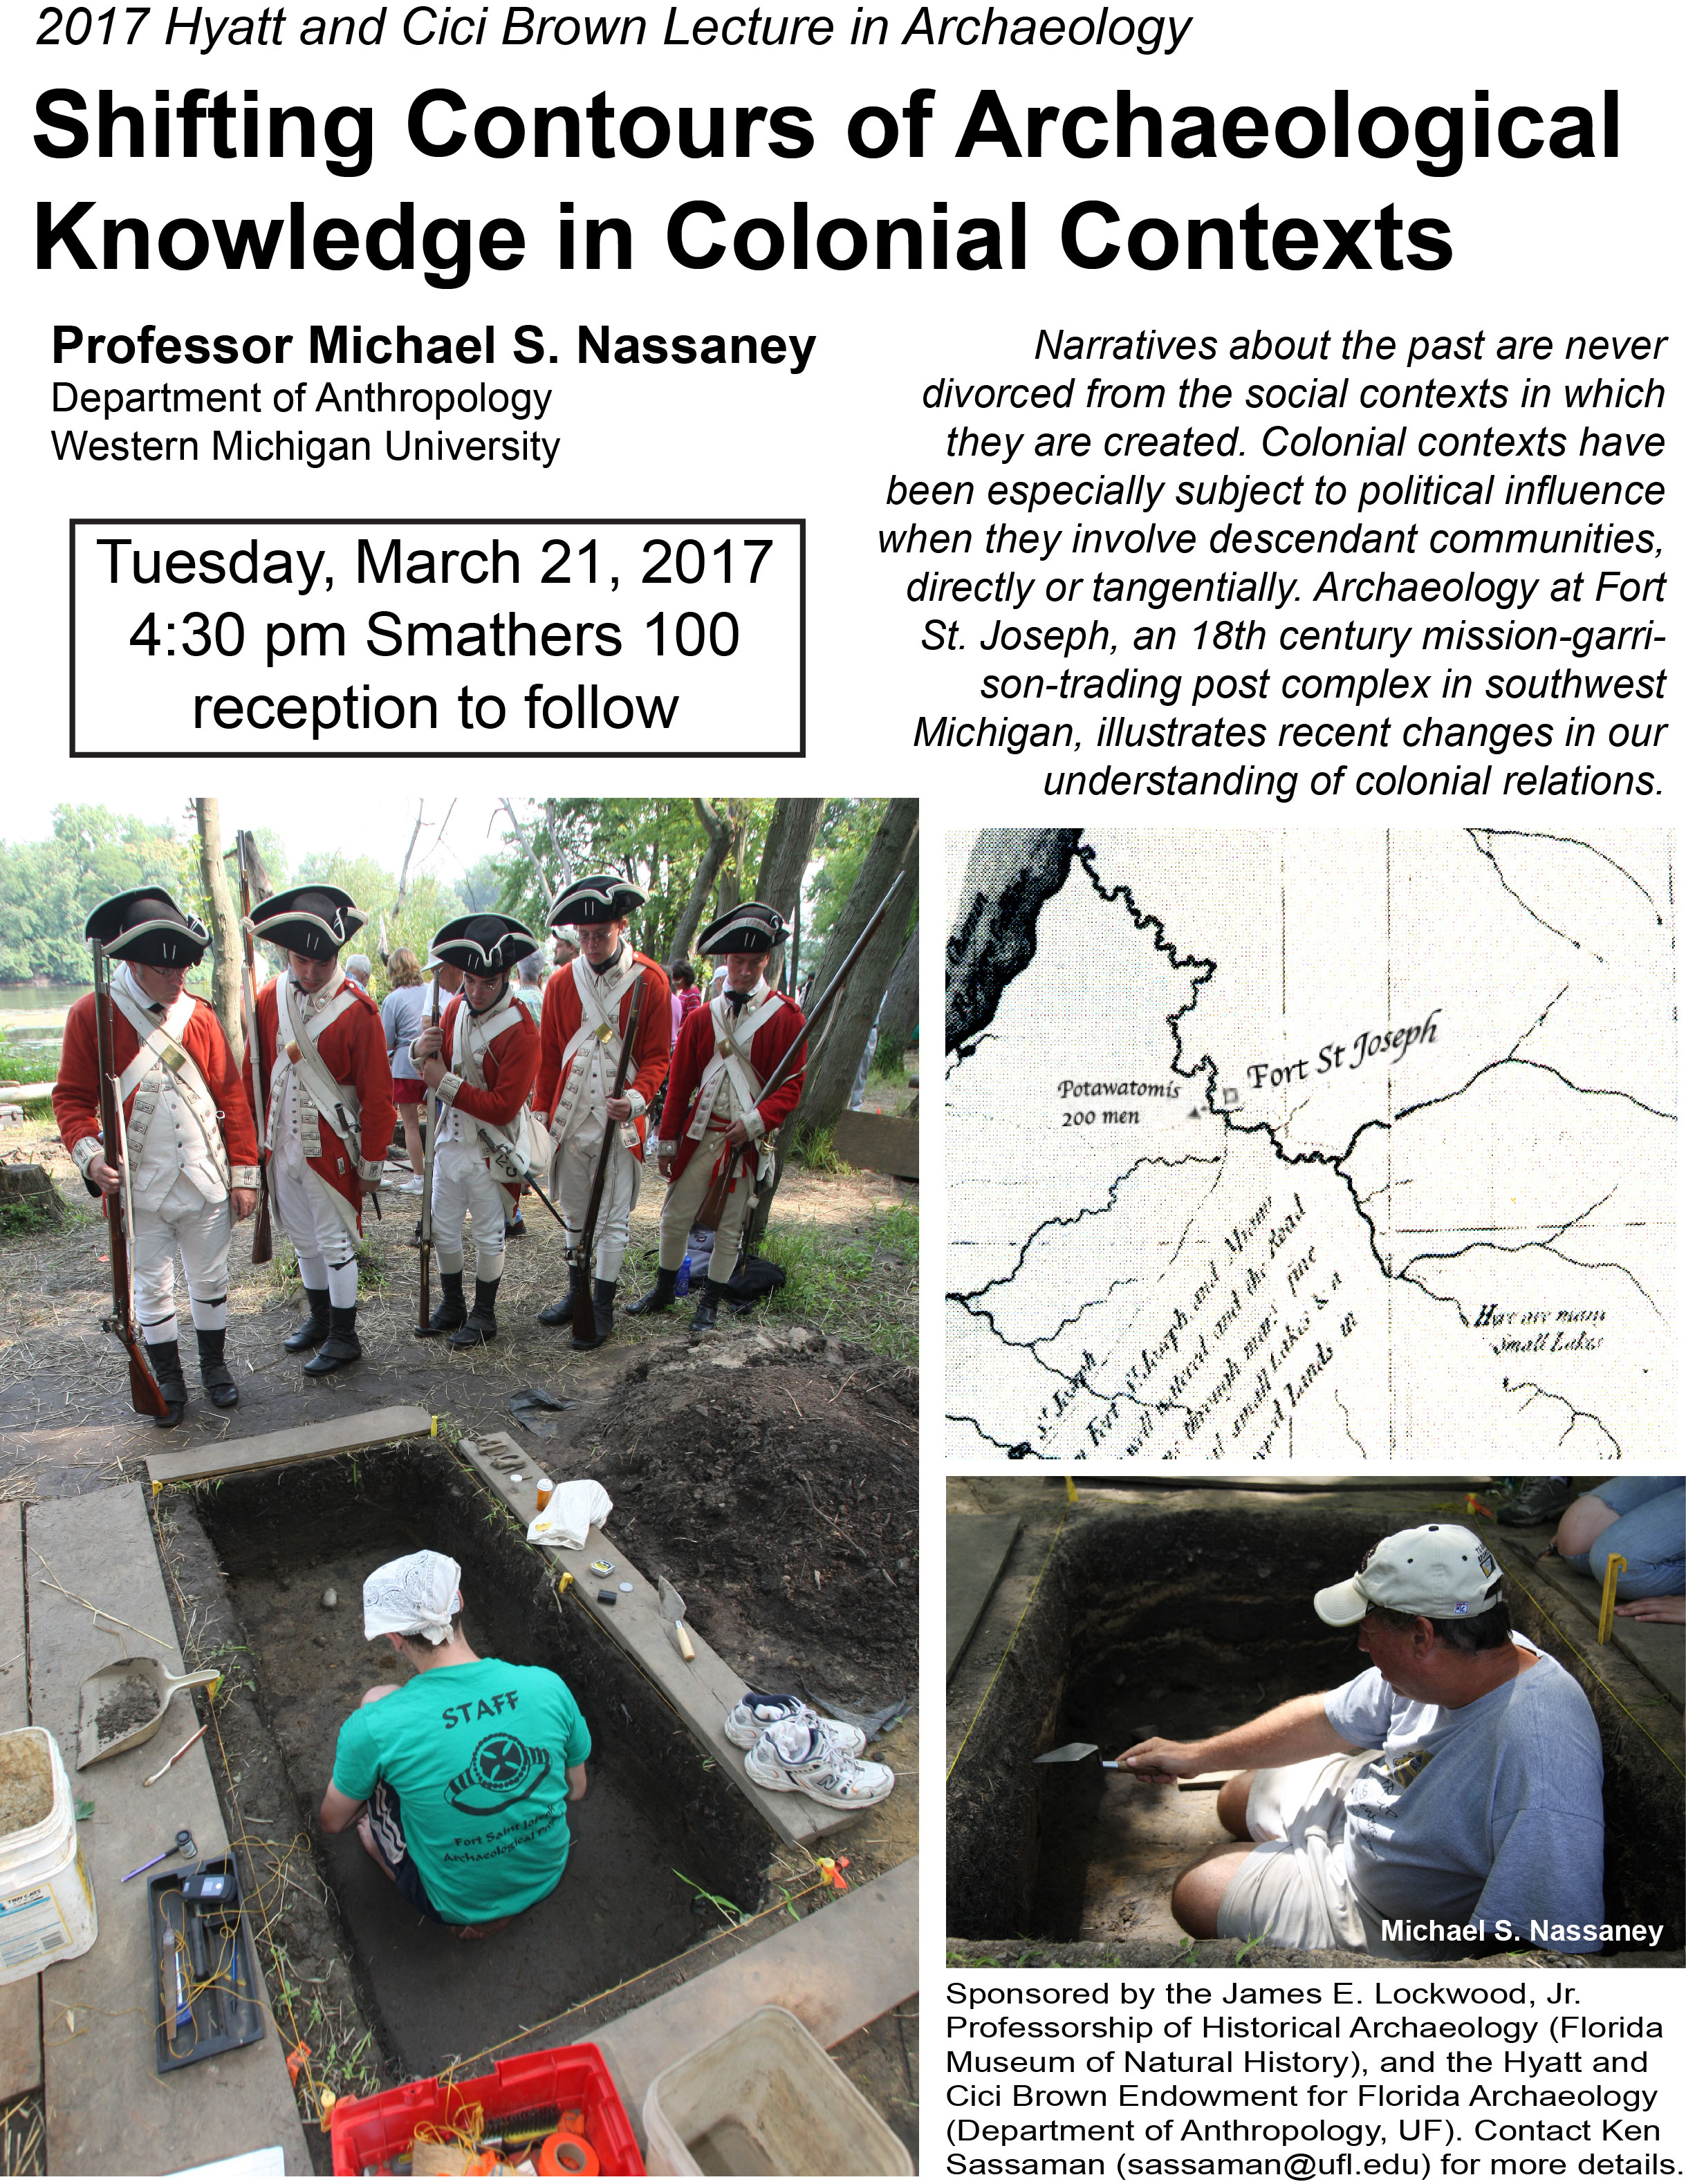 2017 Hyatt and Cici Brown Lecture in Archaeology Announced